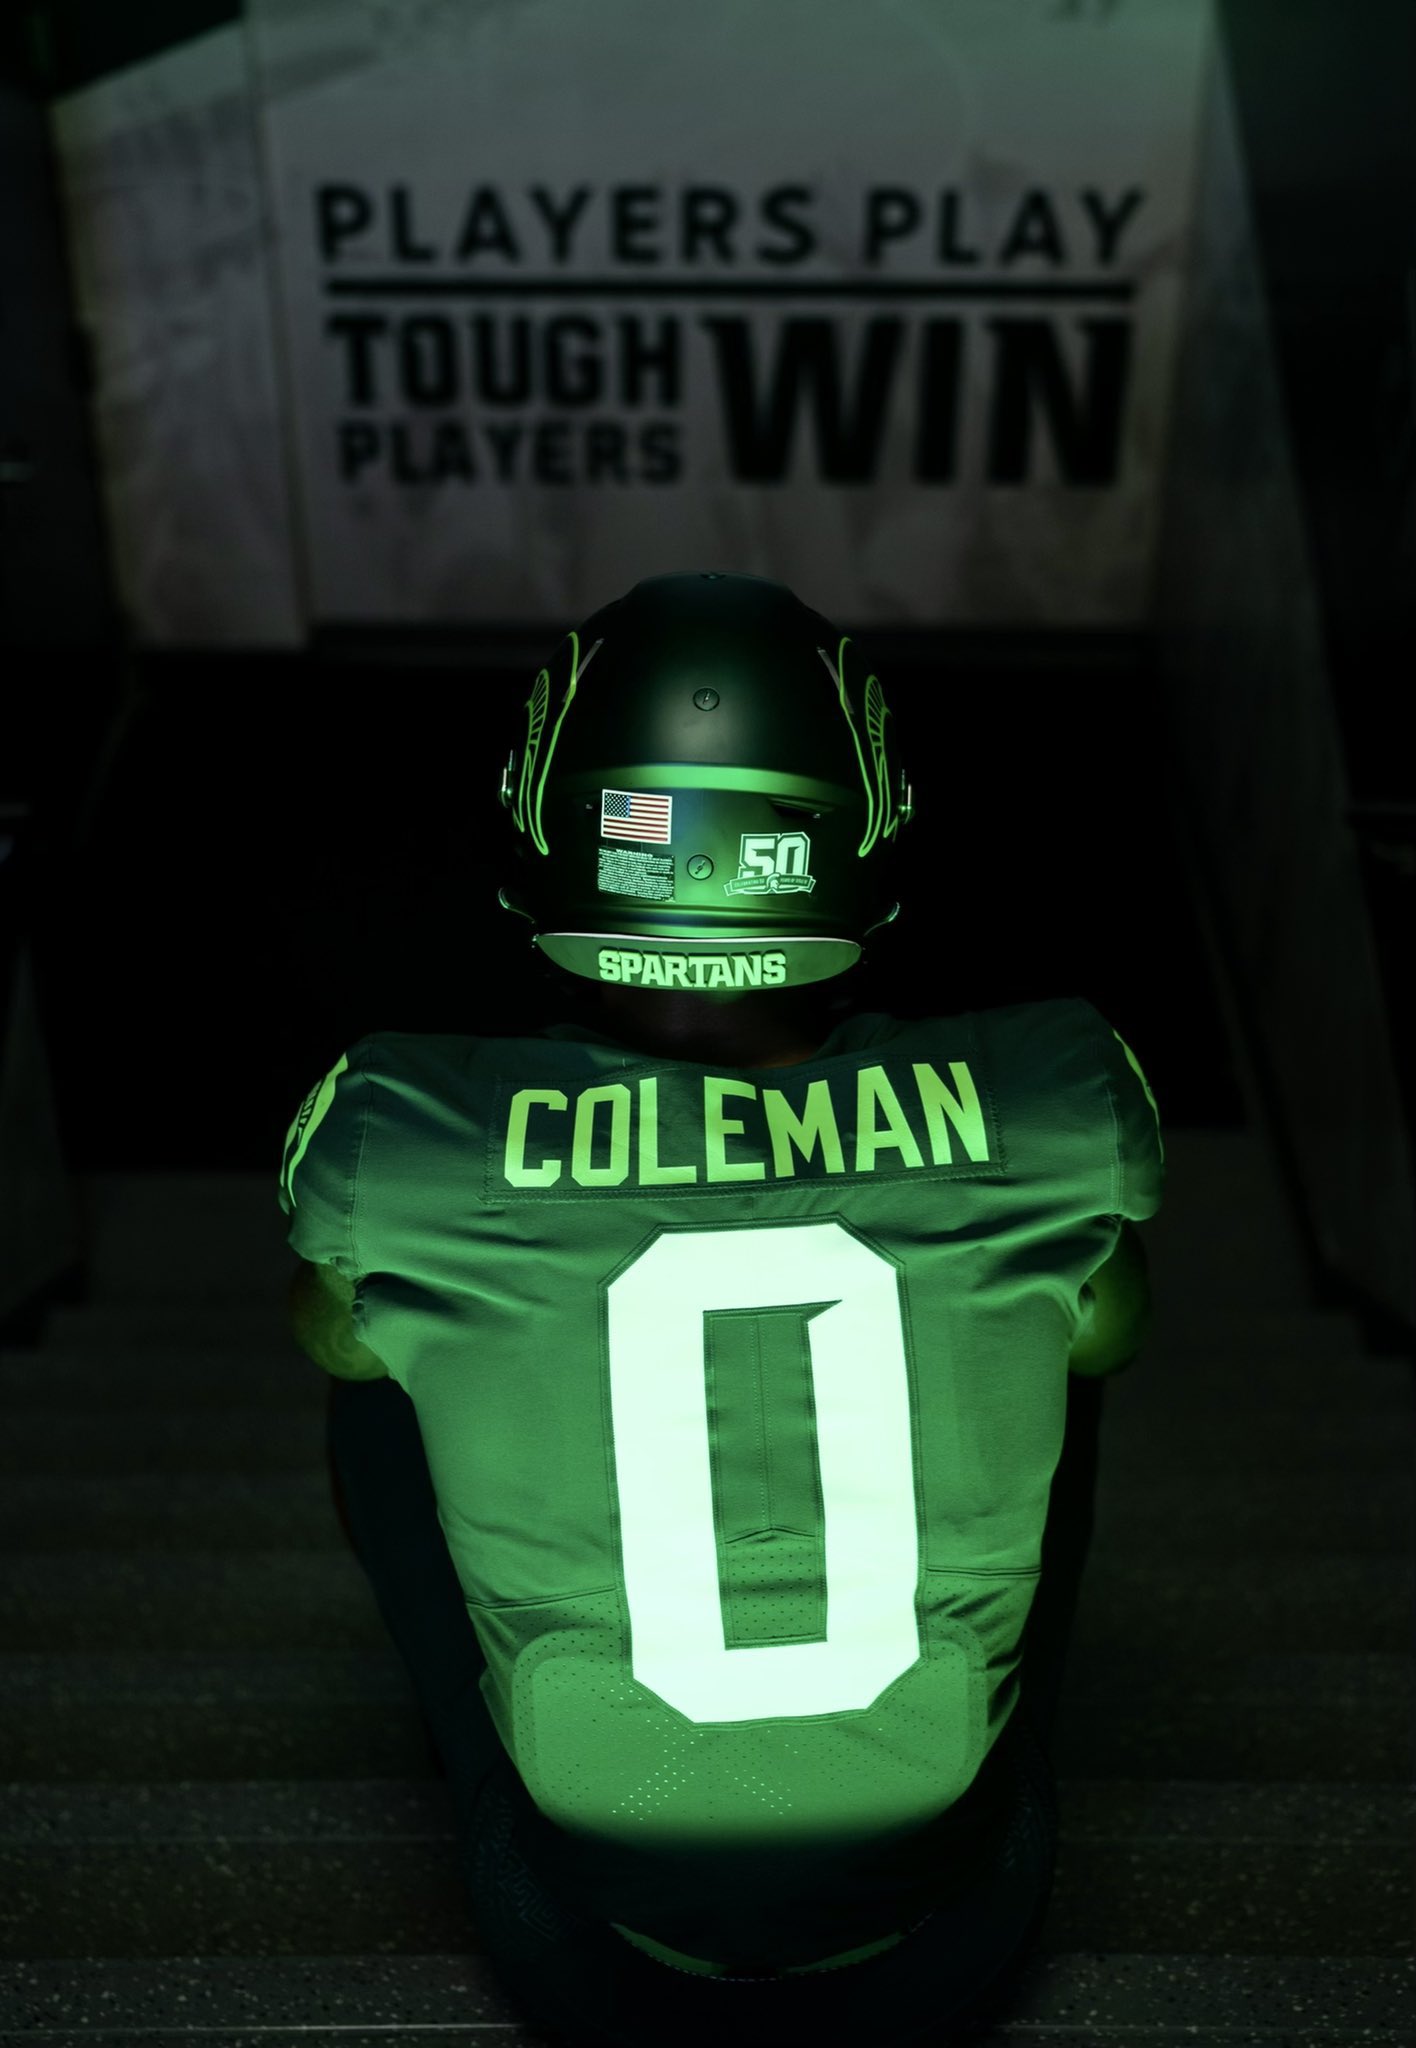 MSU unveils alternate uniforms with shades of lime green; Twitter